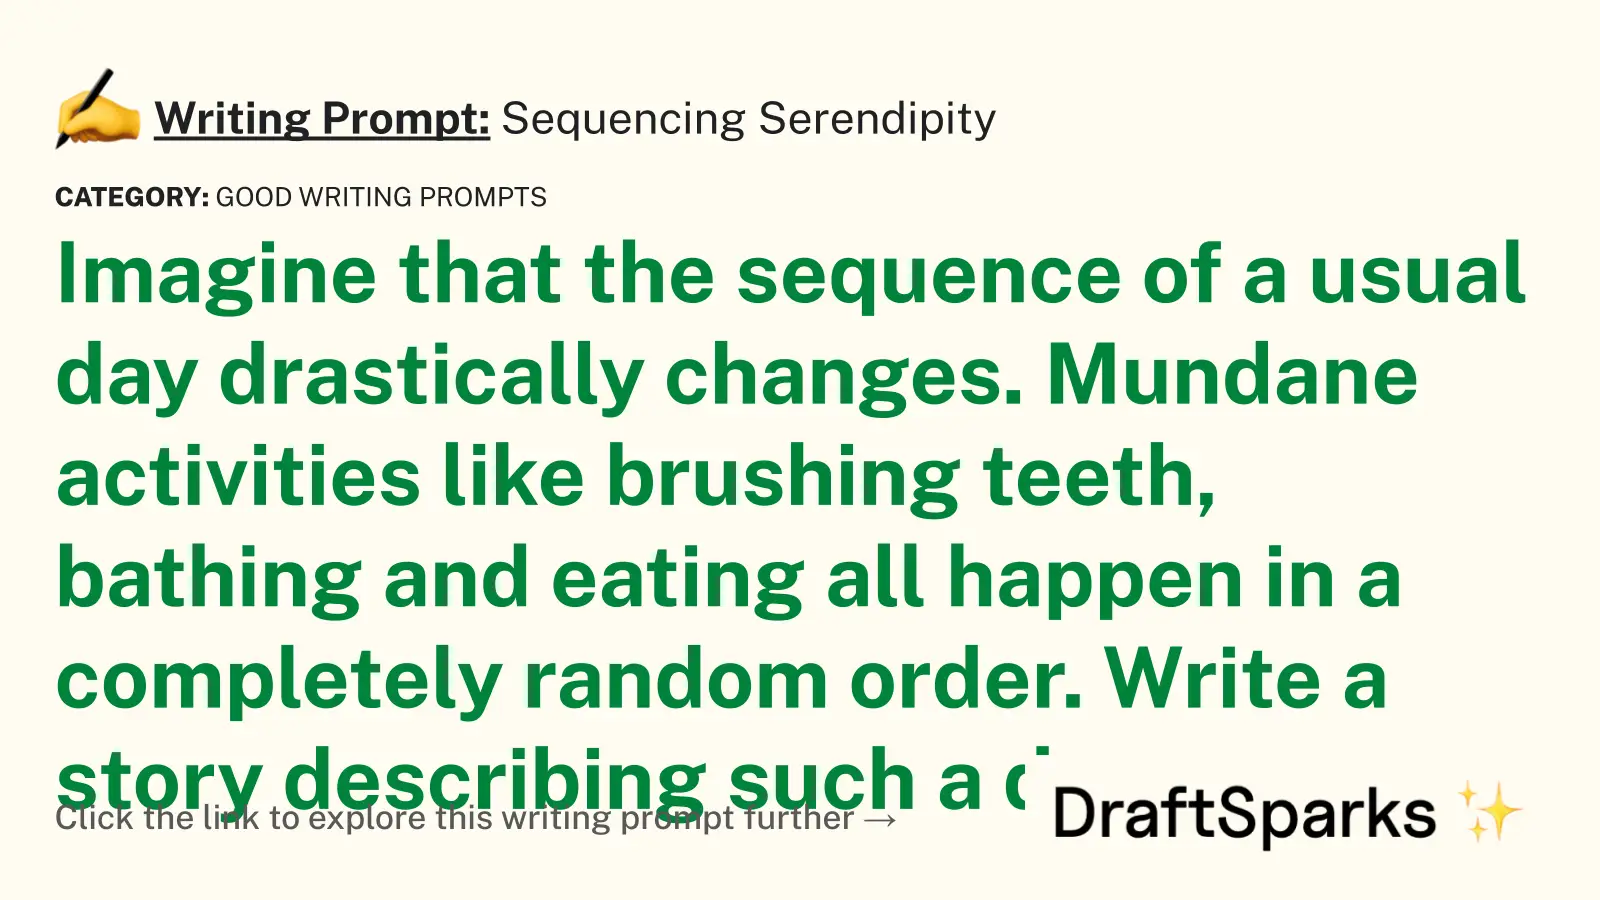 Sequencing Serendipity